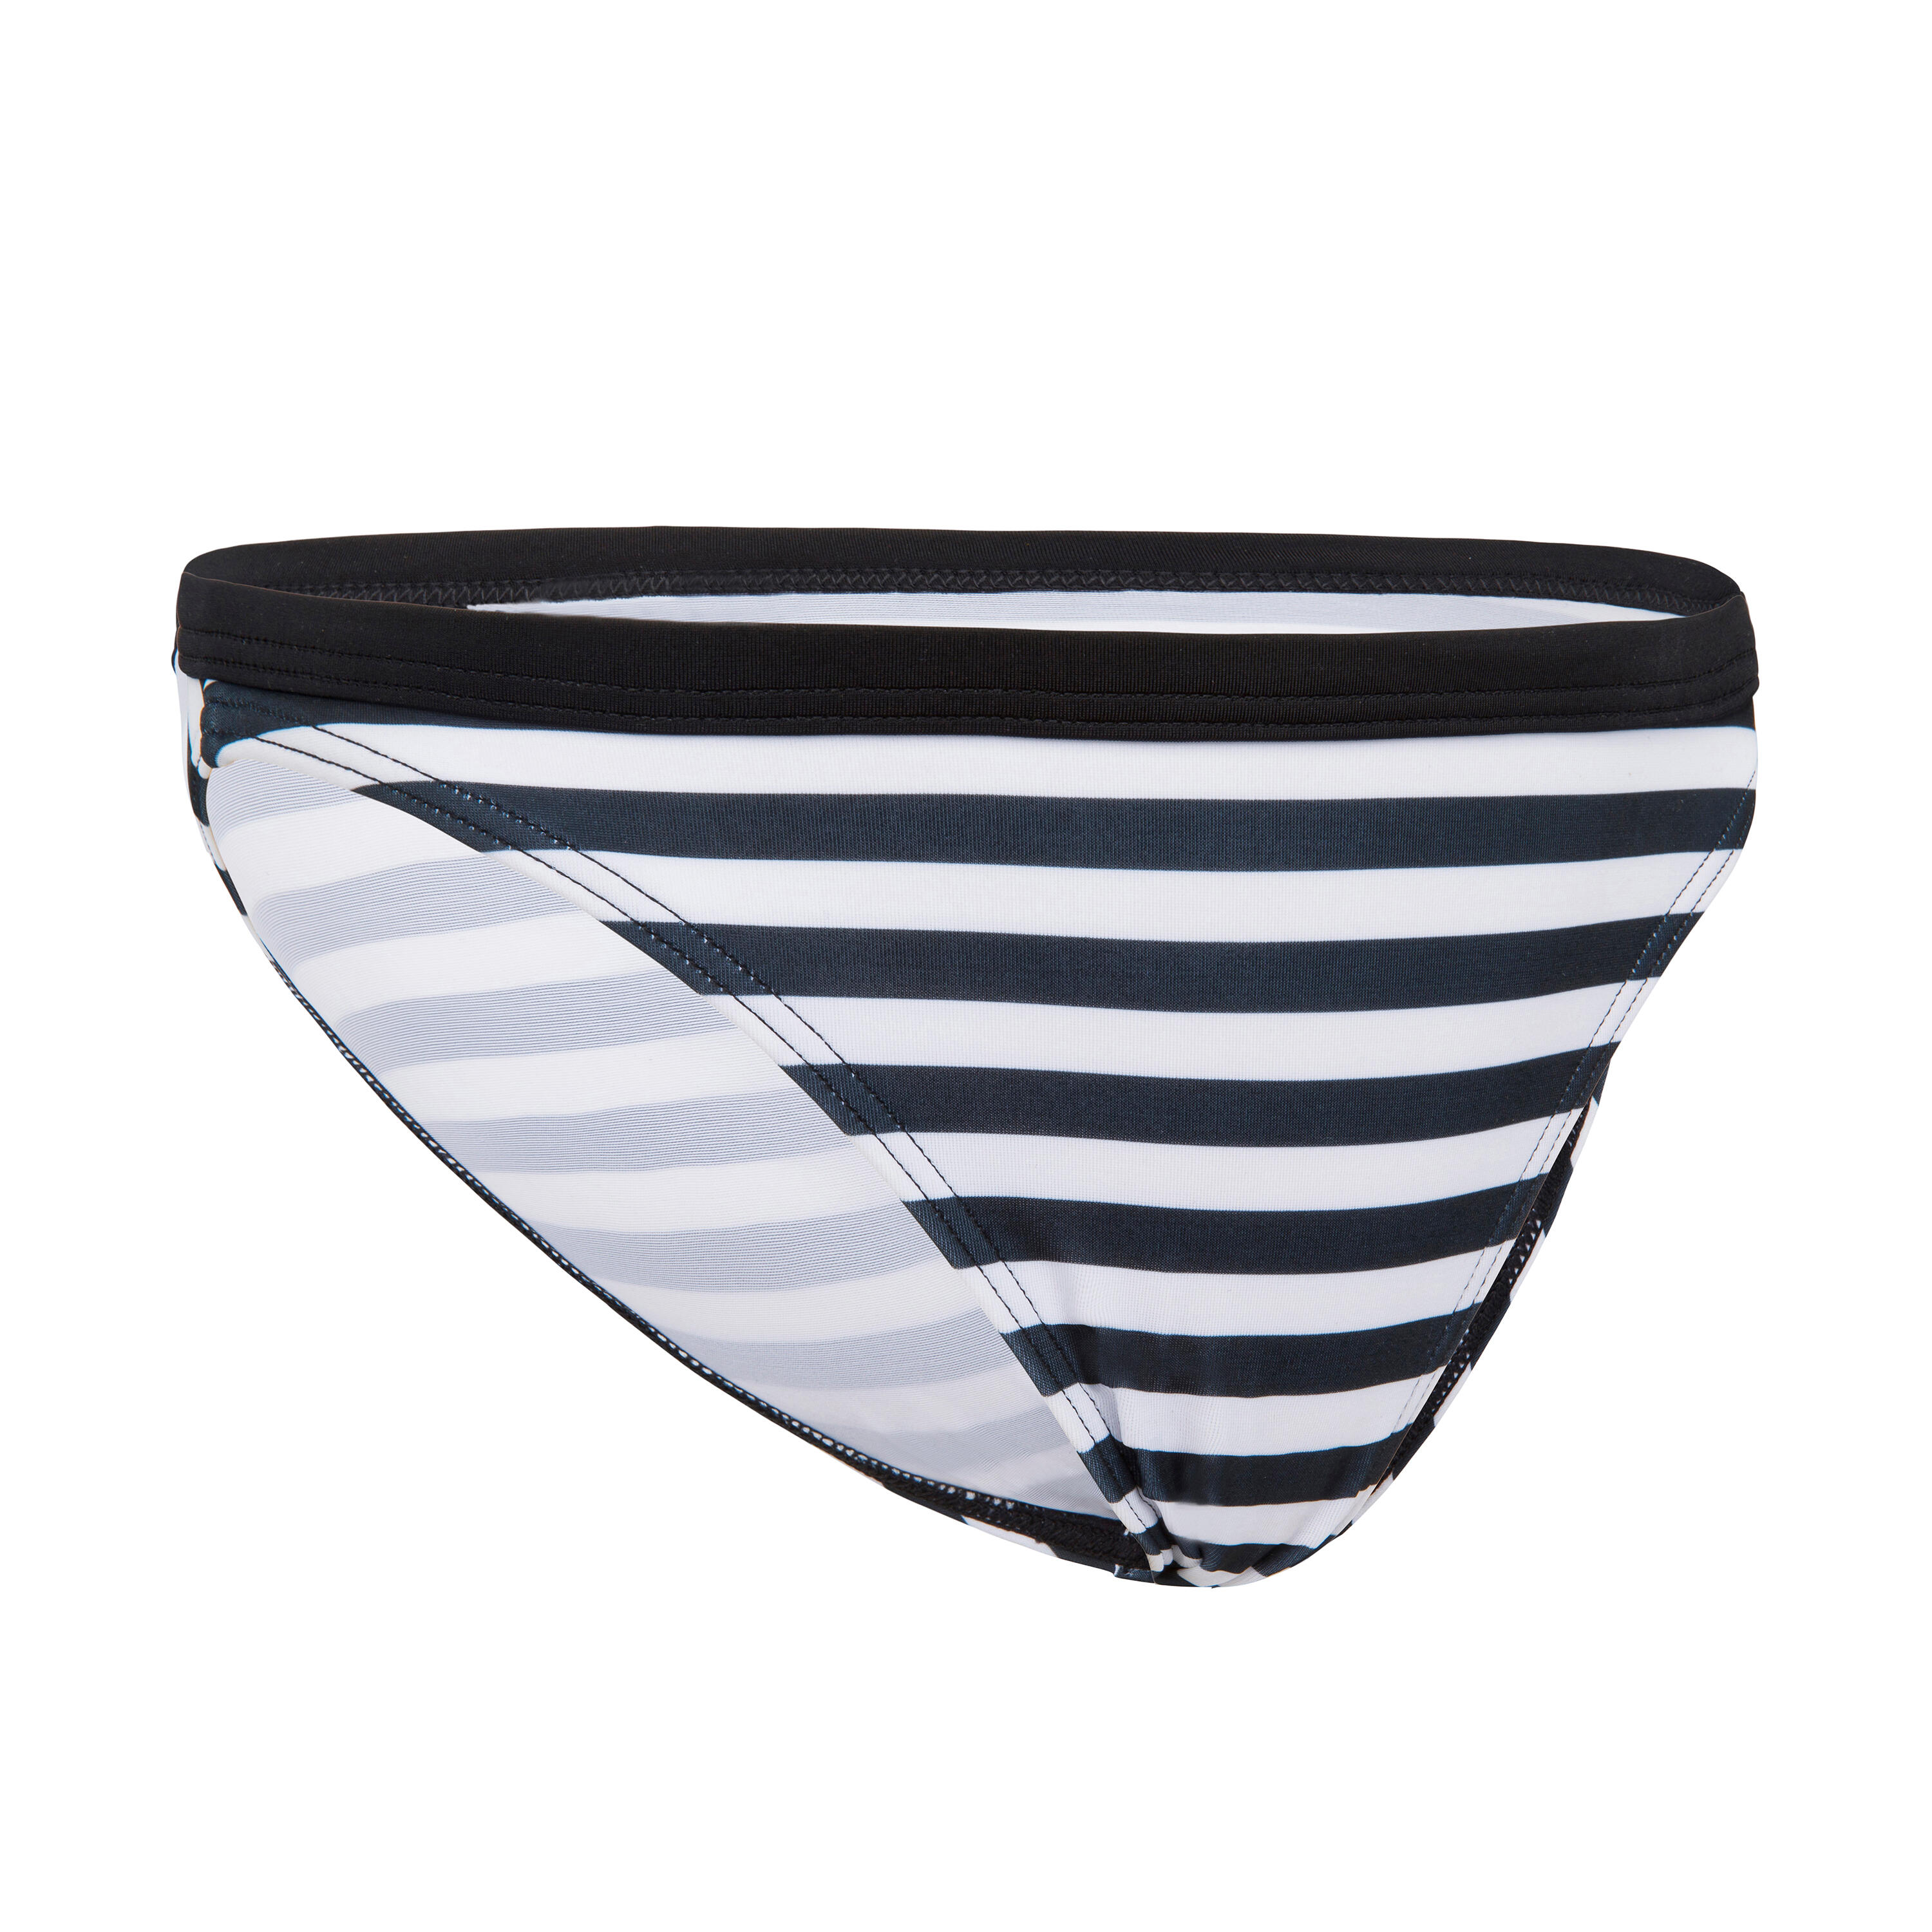 OLAIAN GIRL'S SURF SWIMSUIT BOTTOM CORAL STRIPED BLACK